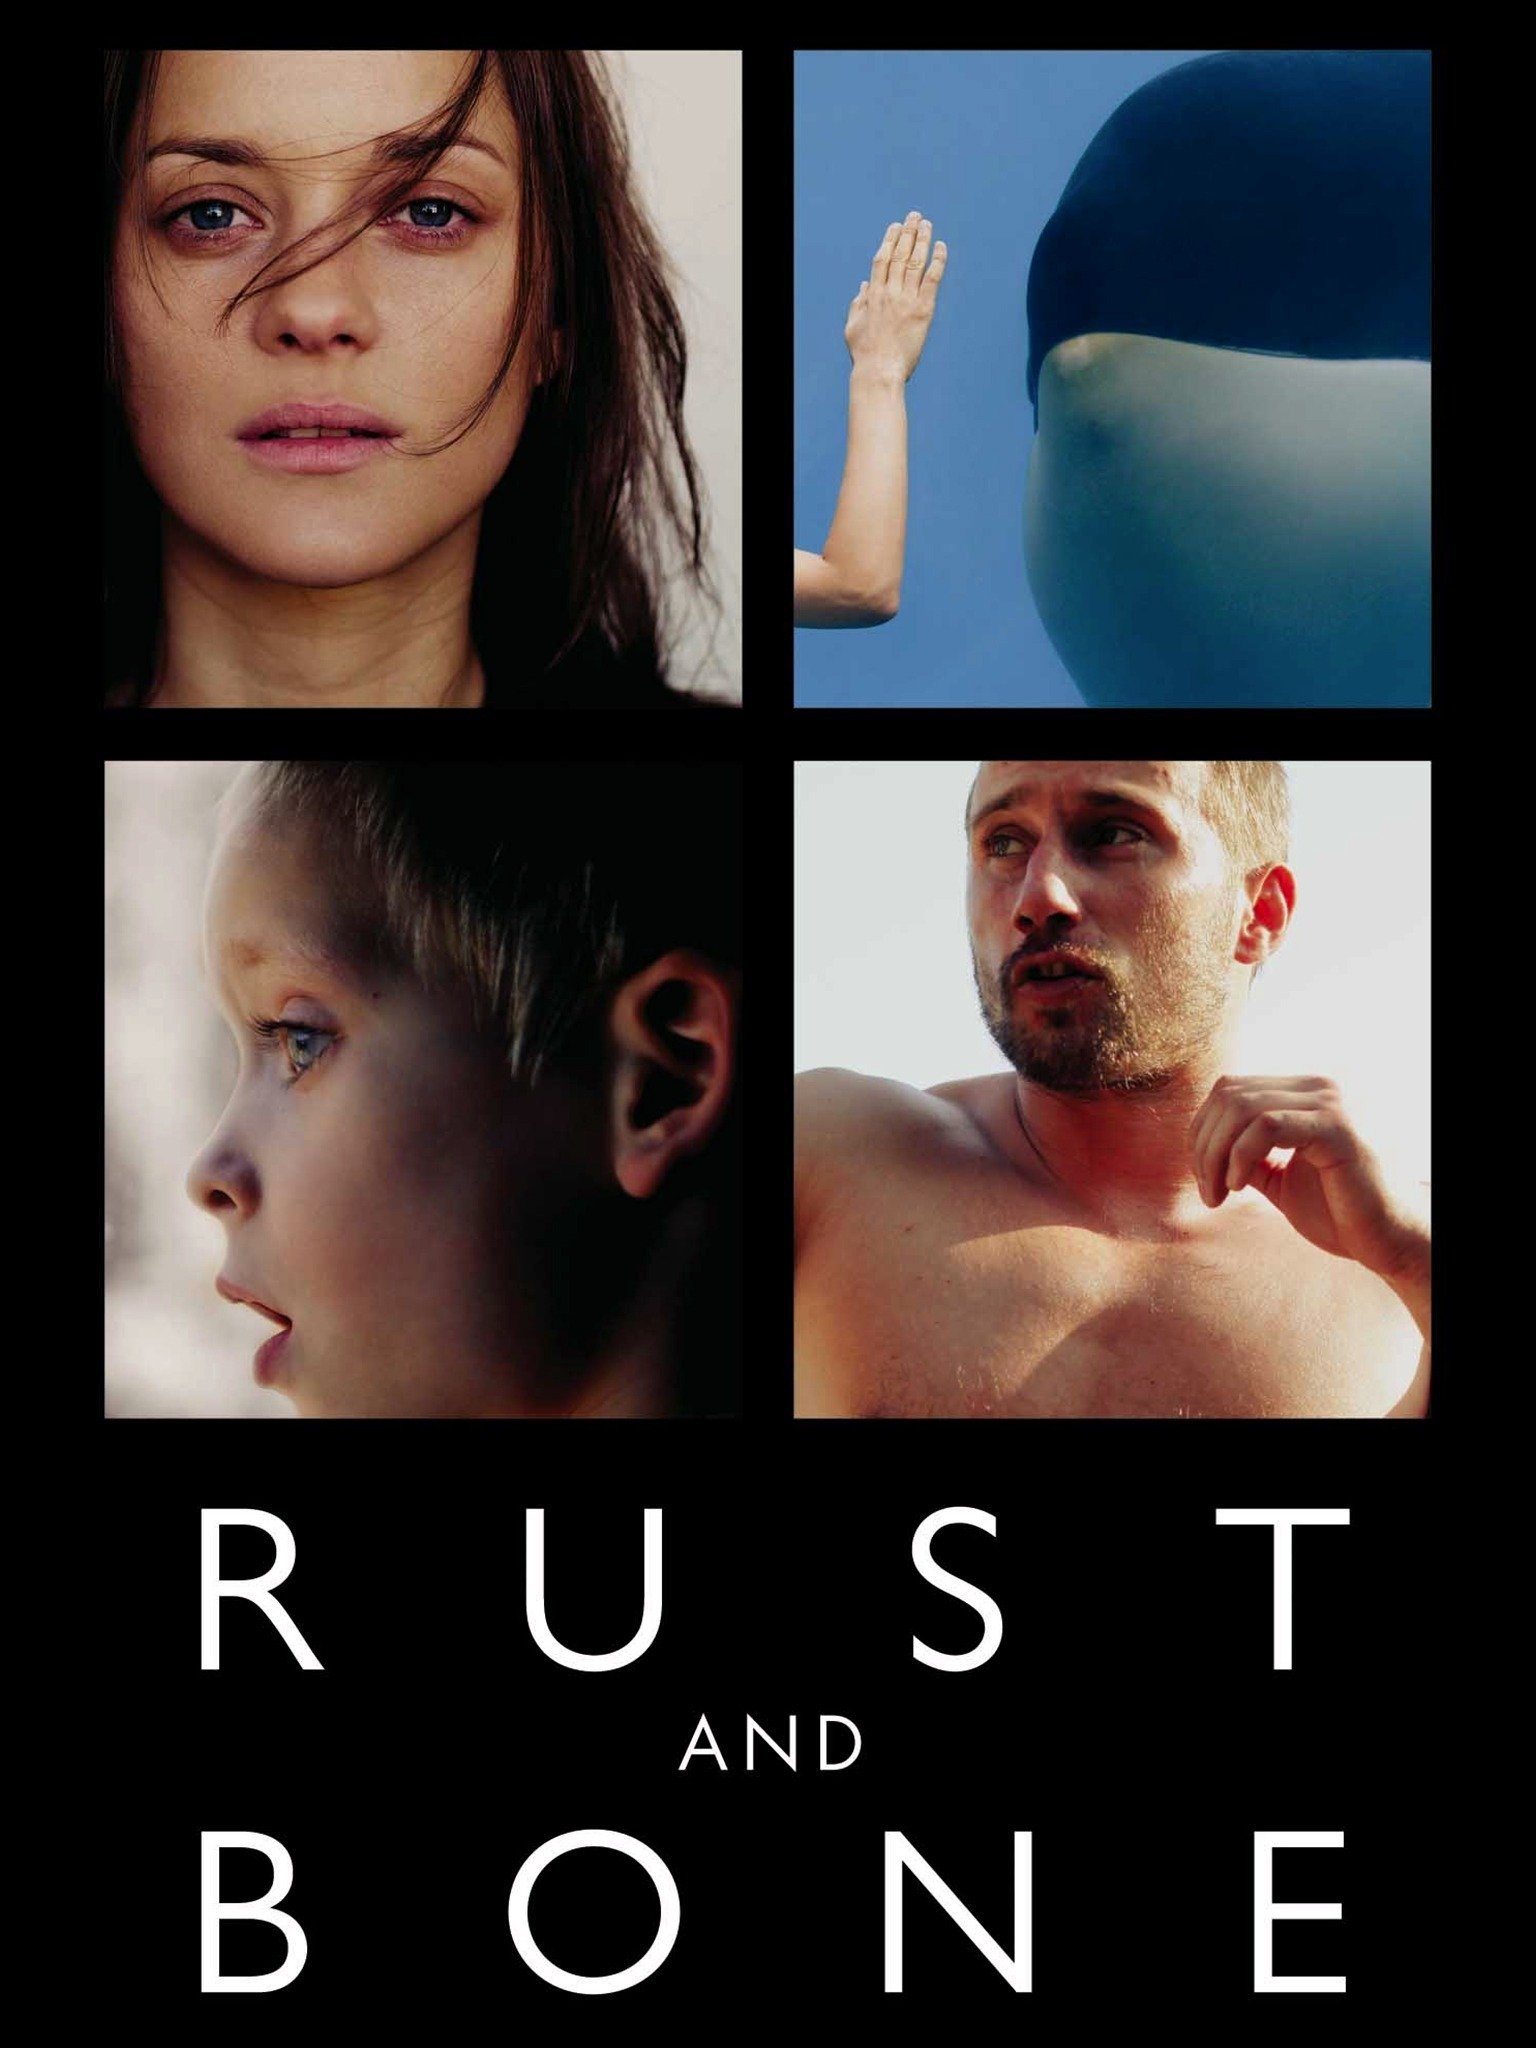 From rust and bone фото 82